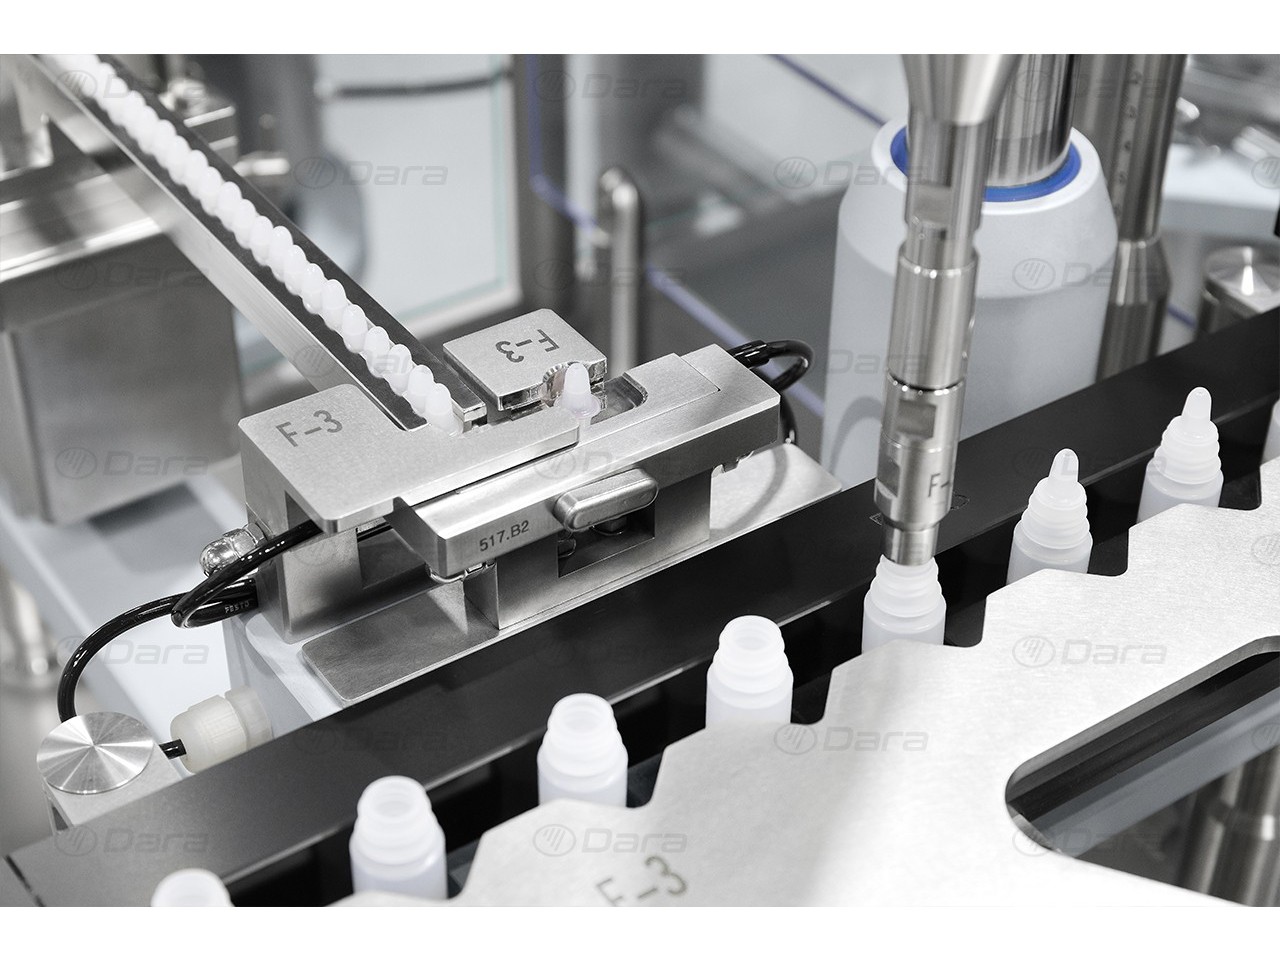 Linear fillers - closers for microtubes, bottles, and vials